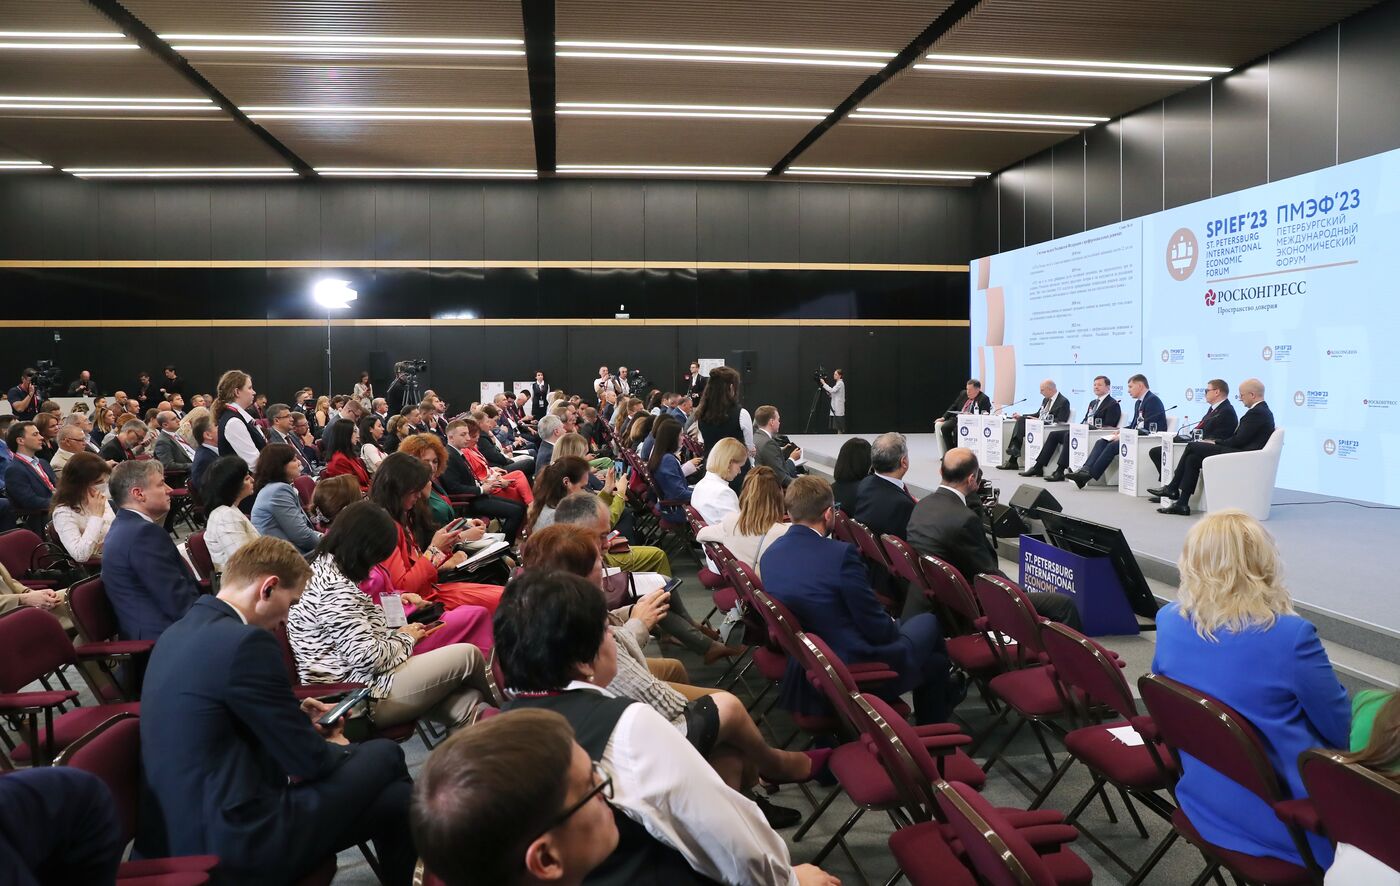 SPIEF-2023. Budgetary and Fiscal Policy as Tools to Support the Financial Stability and Socio-Economic Development of Russia's Regions in the New Environment